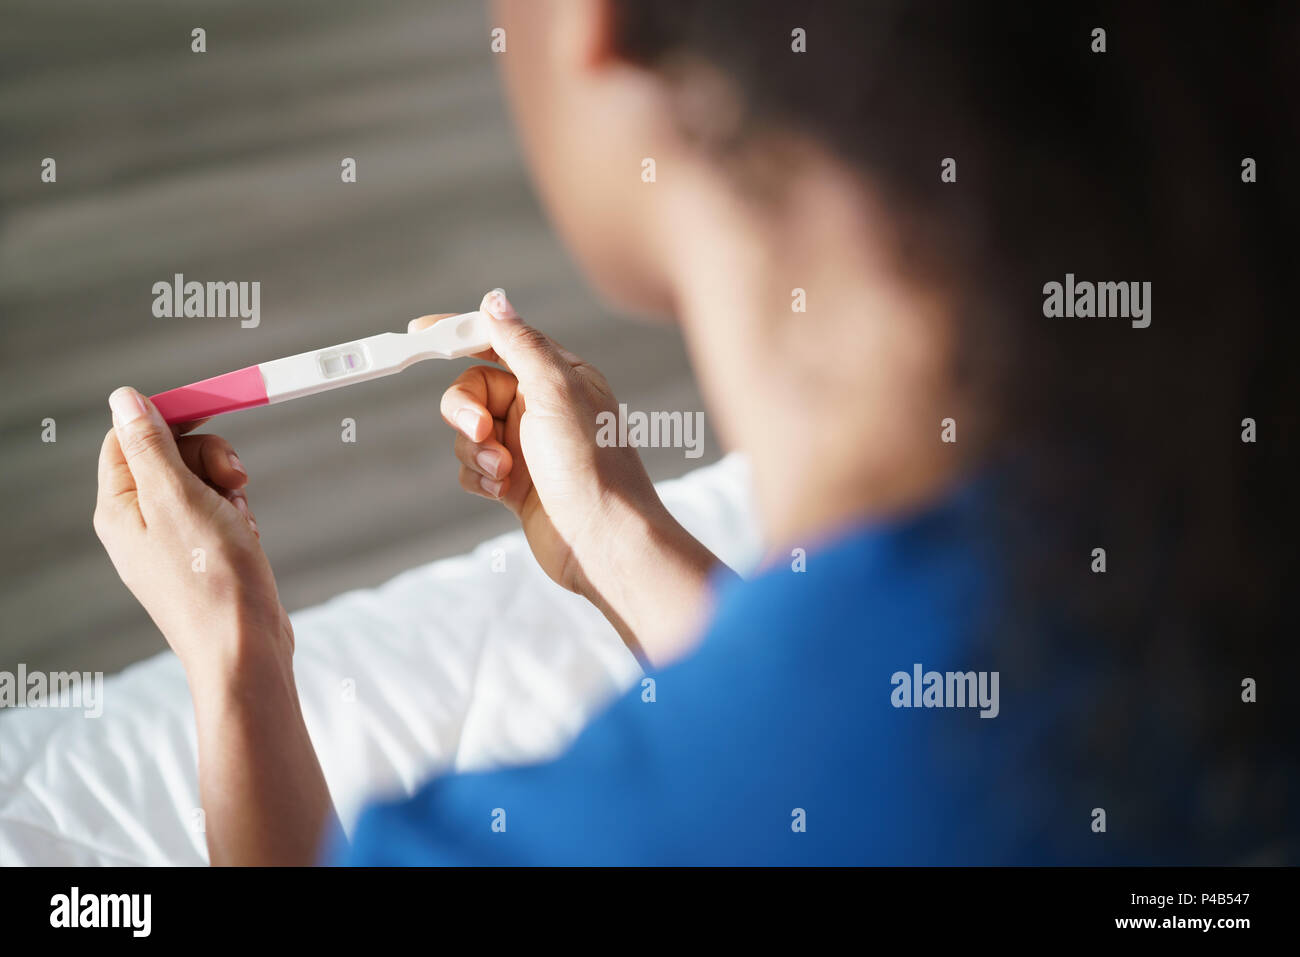 Depressed young hispanic woman with anxious feelings on bed. Black girl holding negative pregnancy test. Close-up of hands and kit Stock Photo